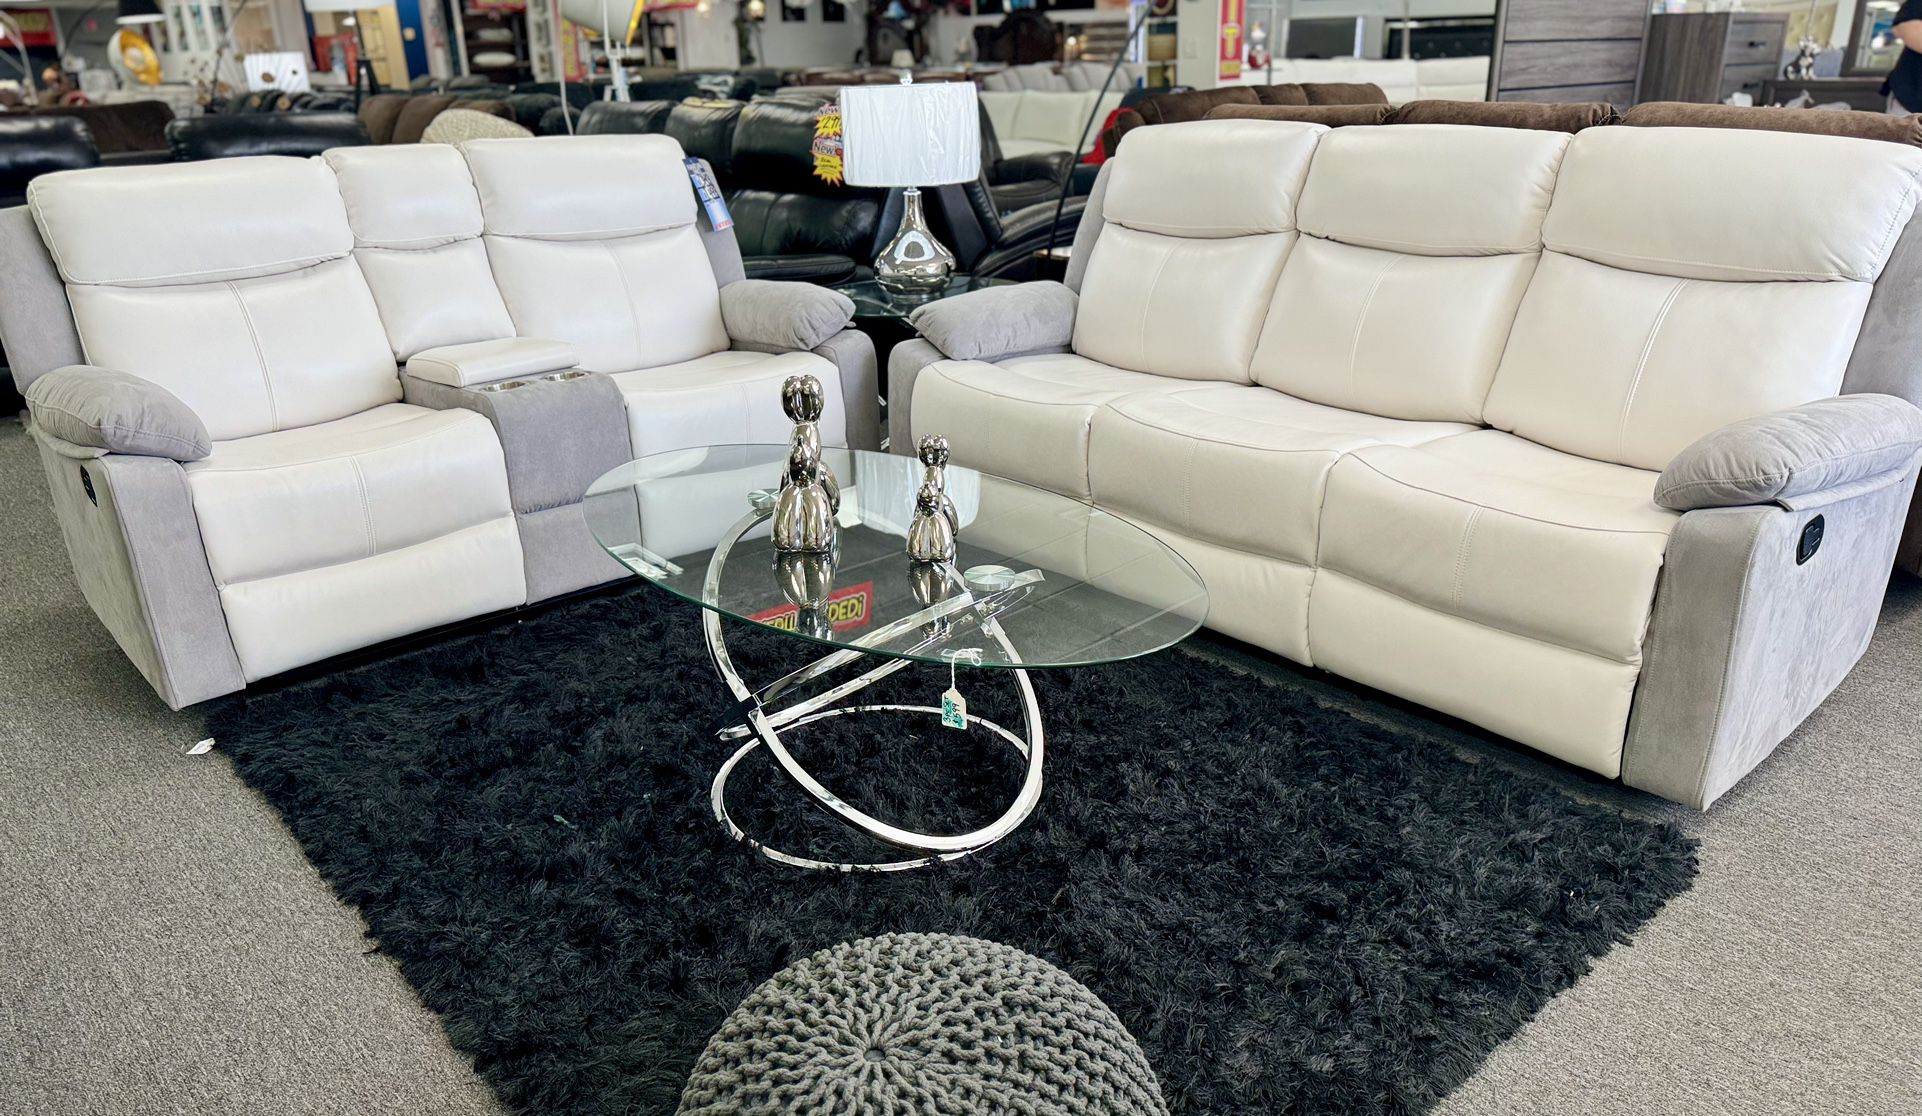 Stunning Two Tone Grey & White Reclining Sofa&Loveseat On Sale Now $999